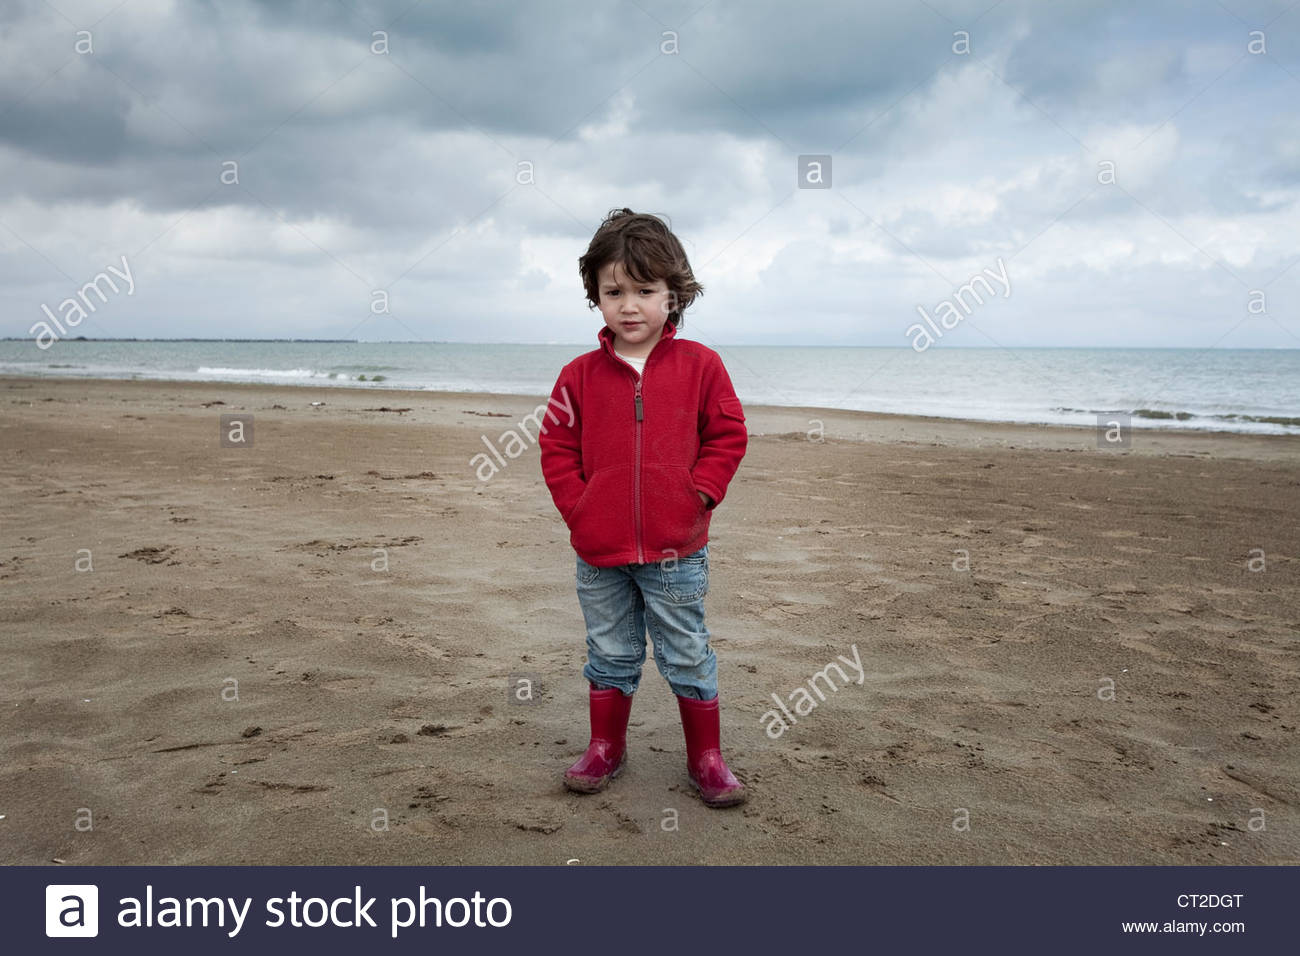 red rain boots on the beach Stock Photo 